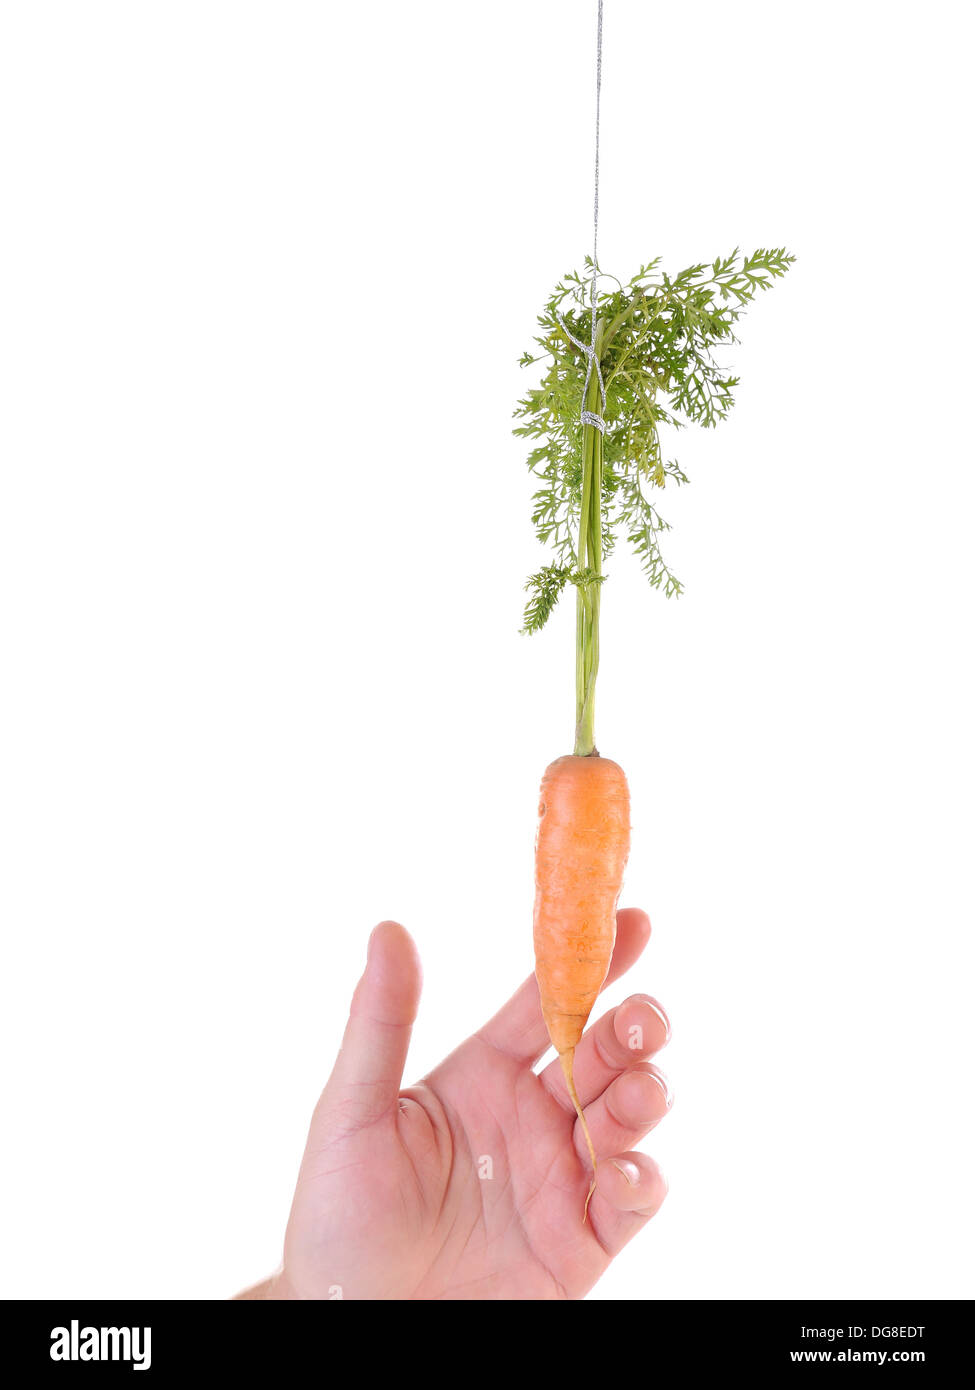 Hand trying to reach a carrot hanging on a string - Carrot and stick approach metaphor Stock Photo